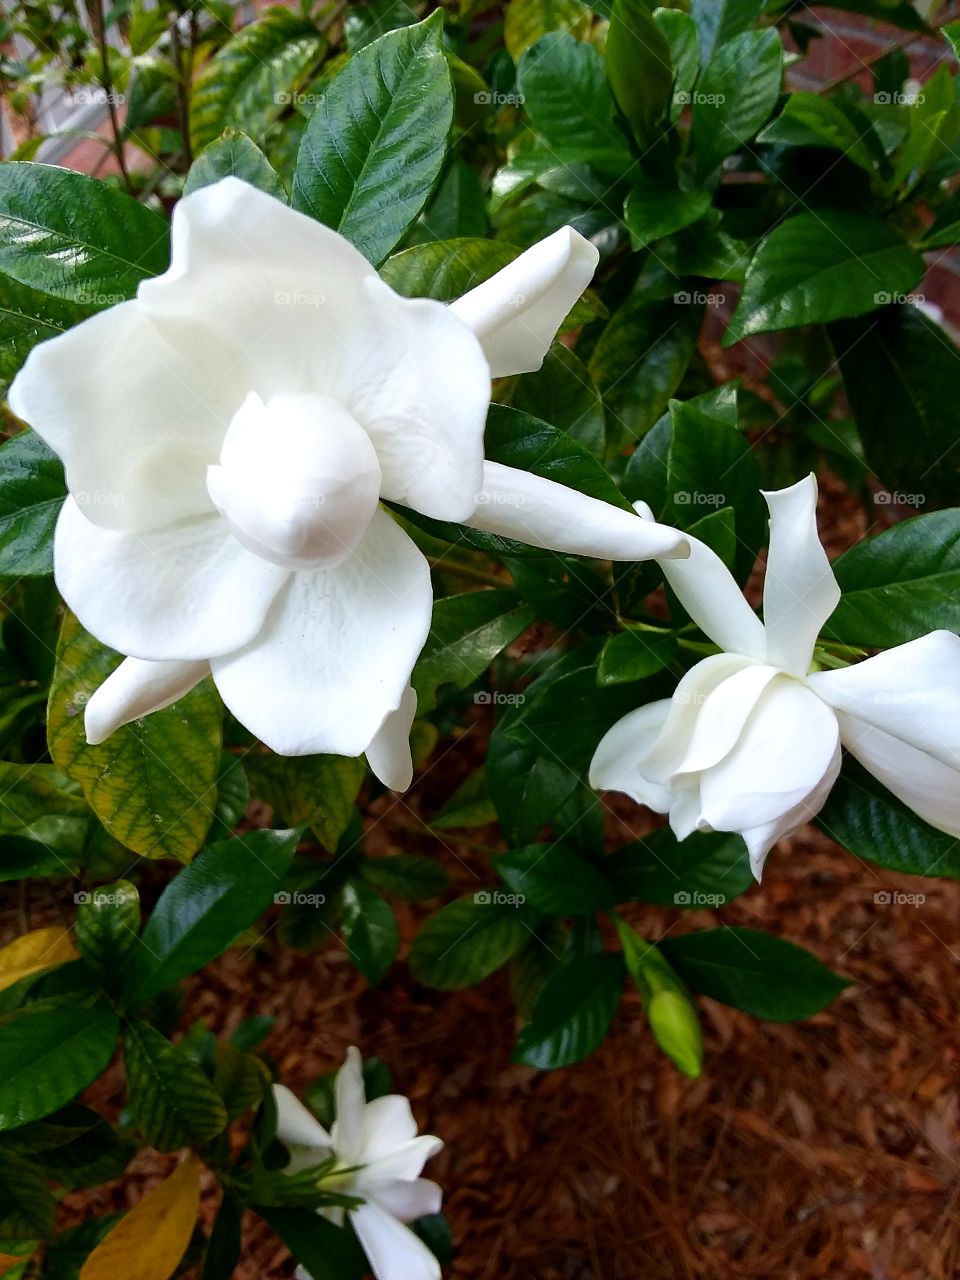 Gardenias are blooming good and smelling great!